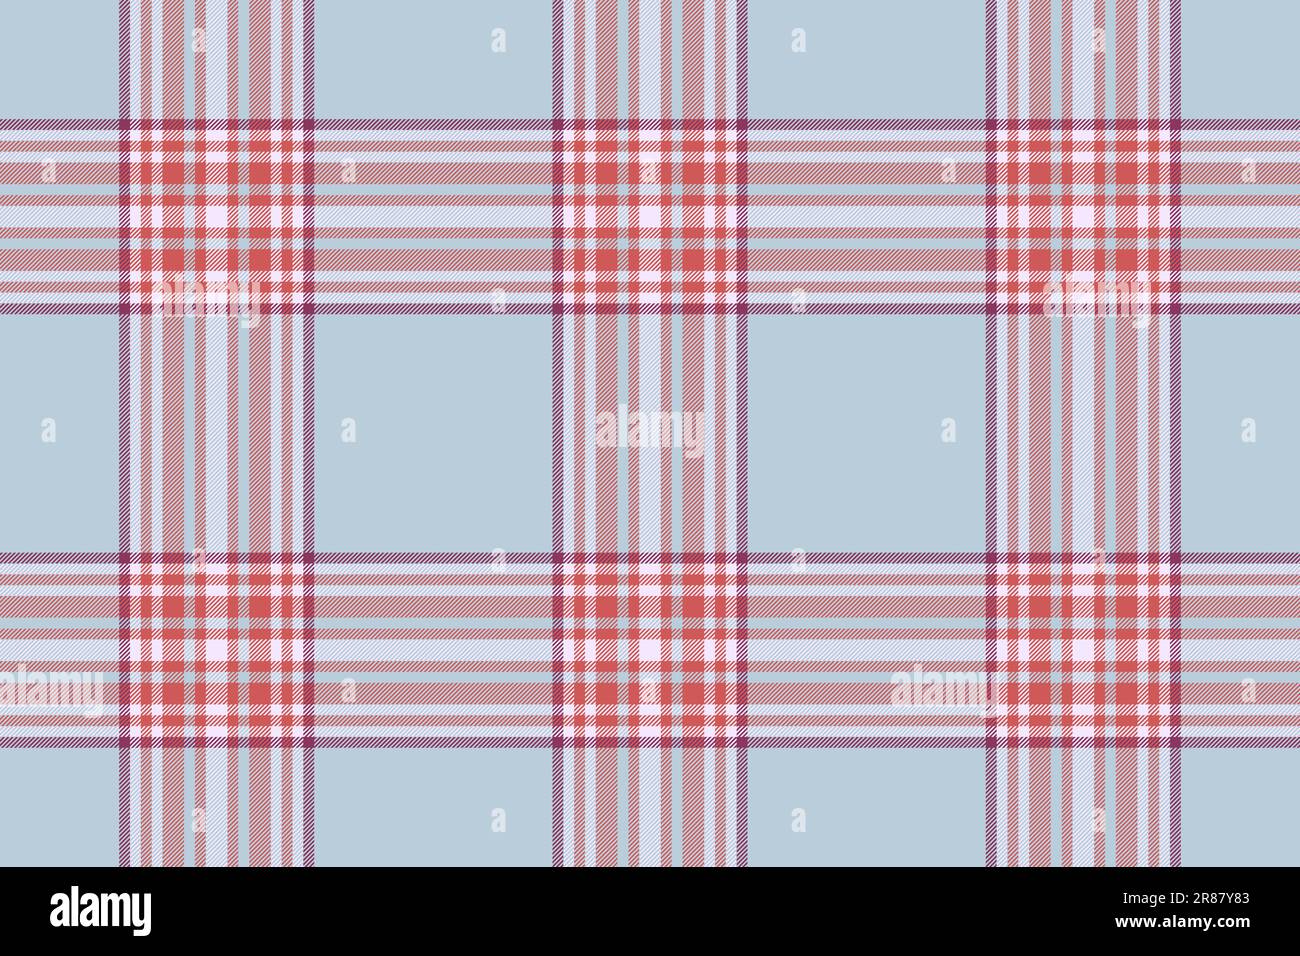 Tartan check background of vector textile plaid with a seamless texture fabric pattern in light and indian red colors. Stock Vector